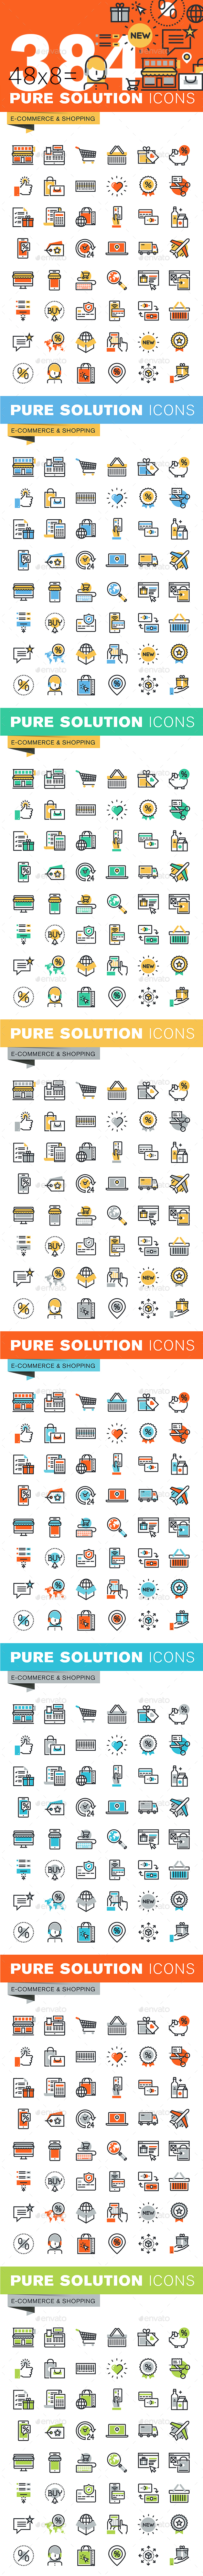 Set of Thin Line Flat Design Icons of E-Commerce and Shopping